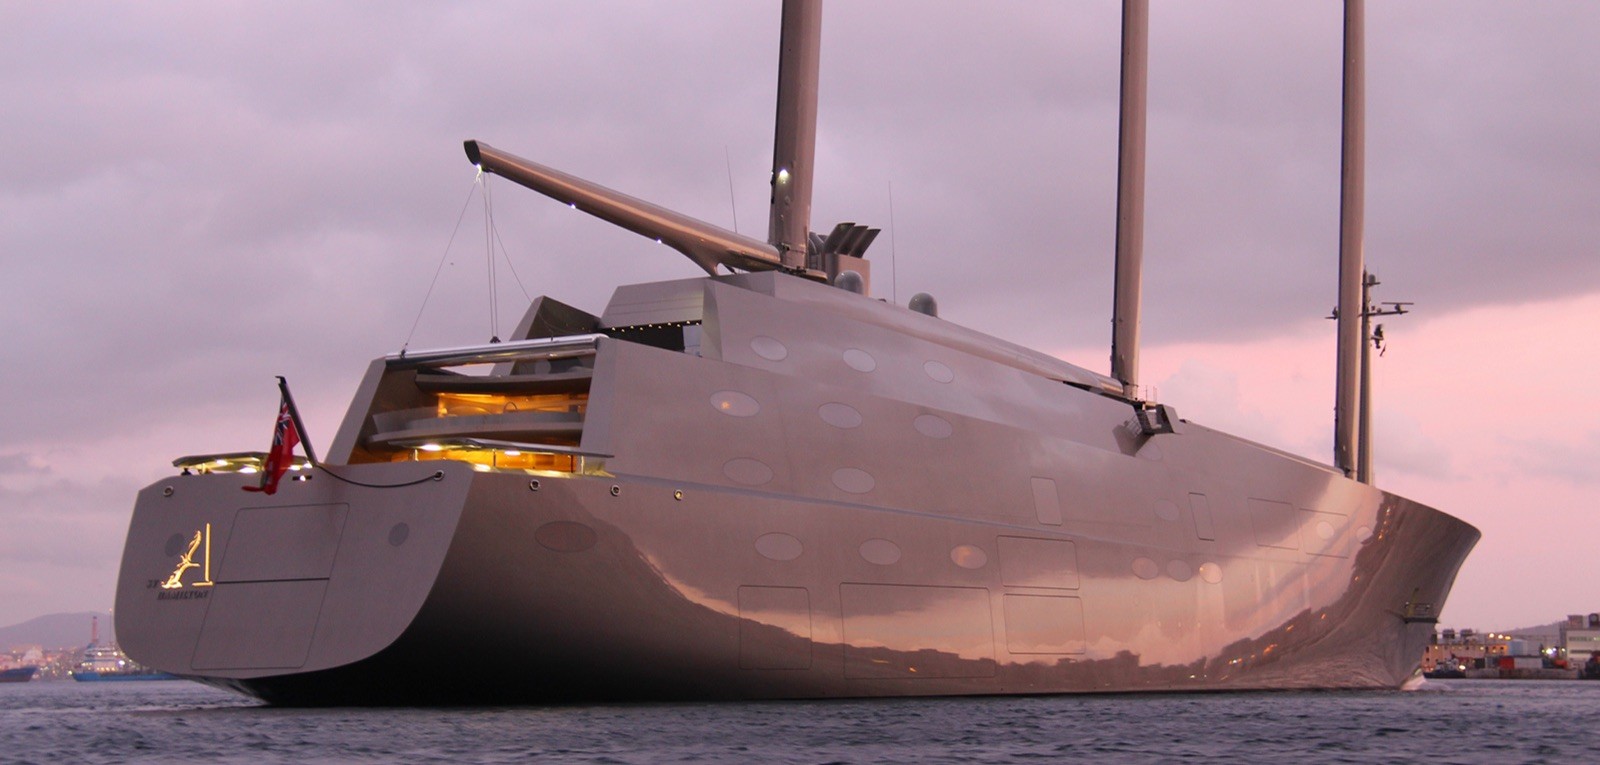 Sailing Yacht A Remains World's Most Beautiful, Biggest Sail-Assisted